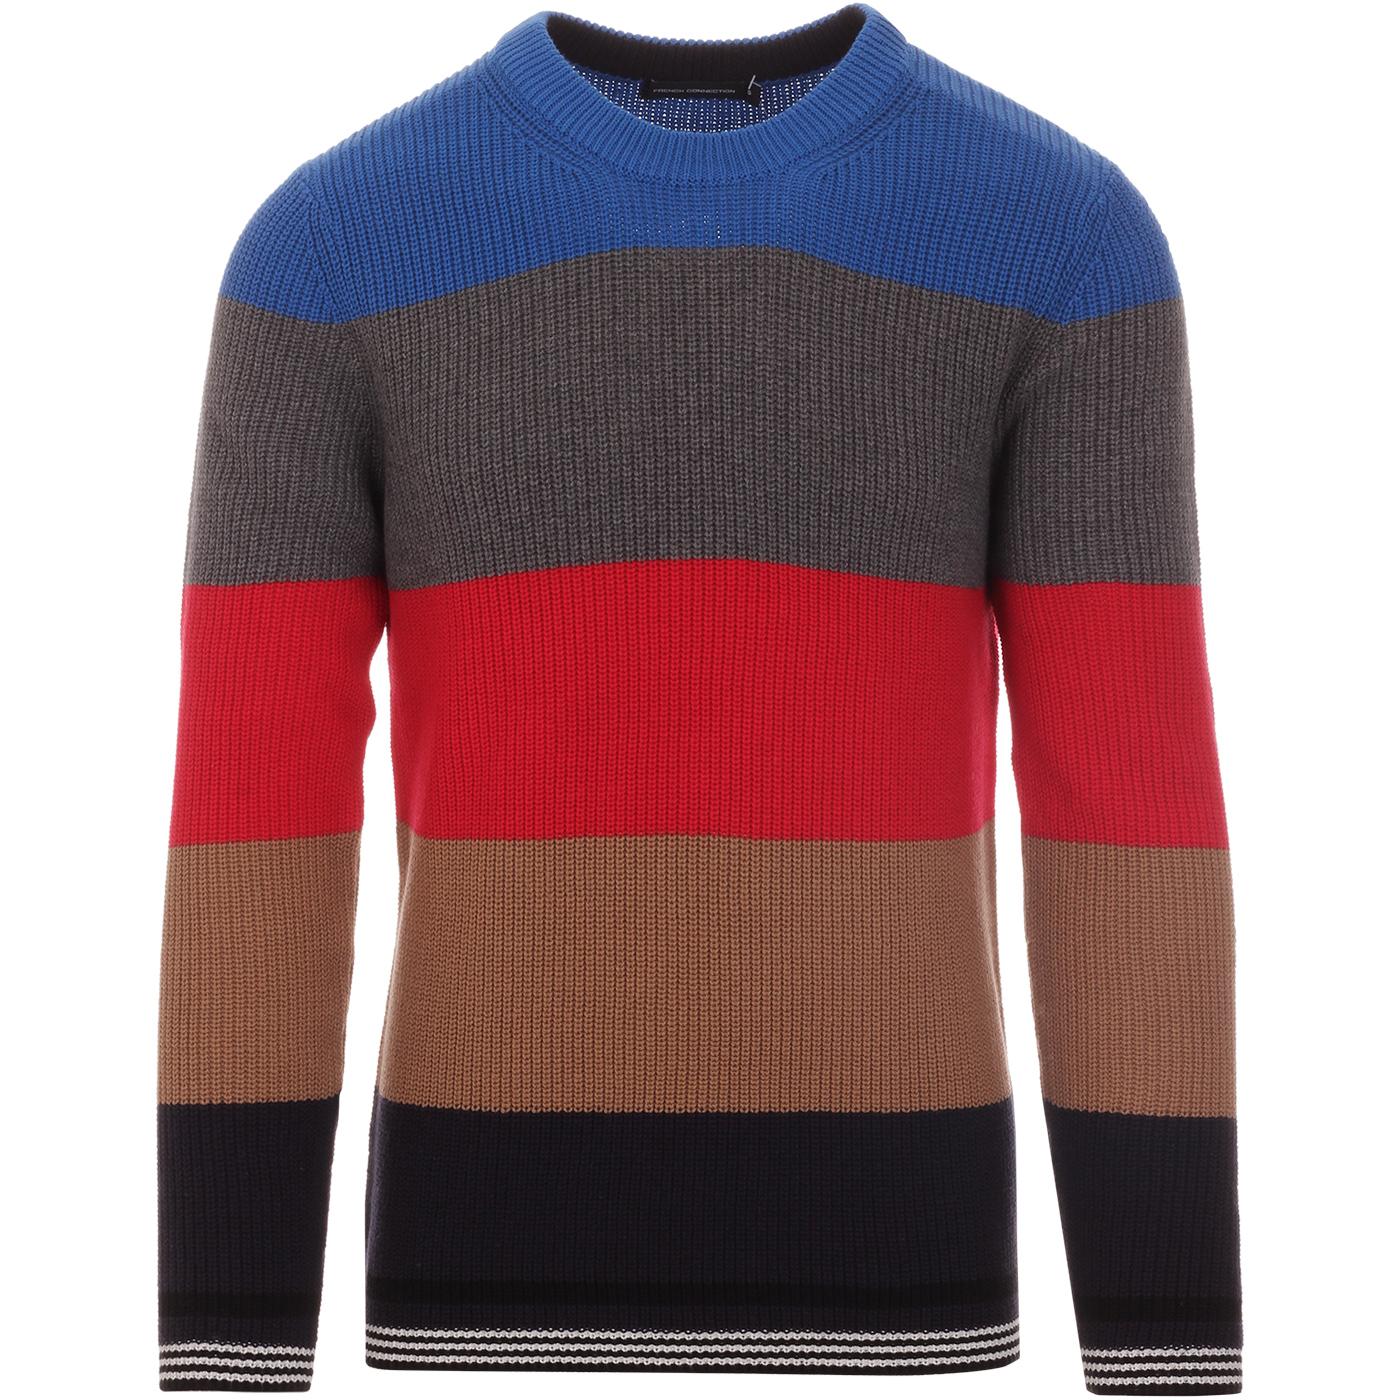 FRENCH CONNECTION Retro Indie Block Stripe Jumper Red